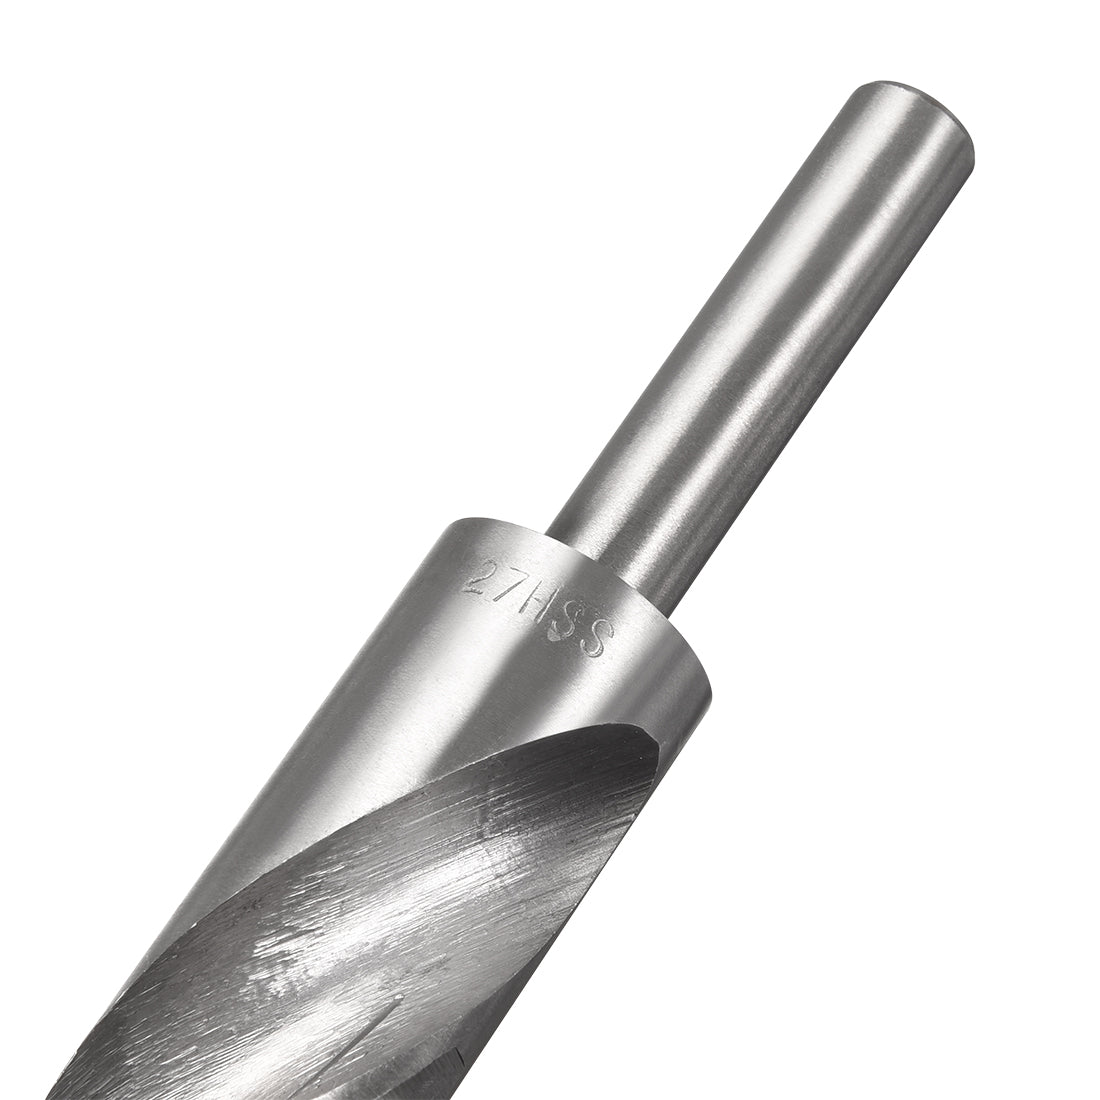 uxcell Uxcell 27mm Reduced Shank Drill Bit High Speed Steel 4241 with 1/2" Straight Shank